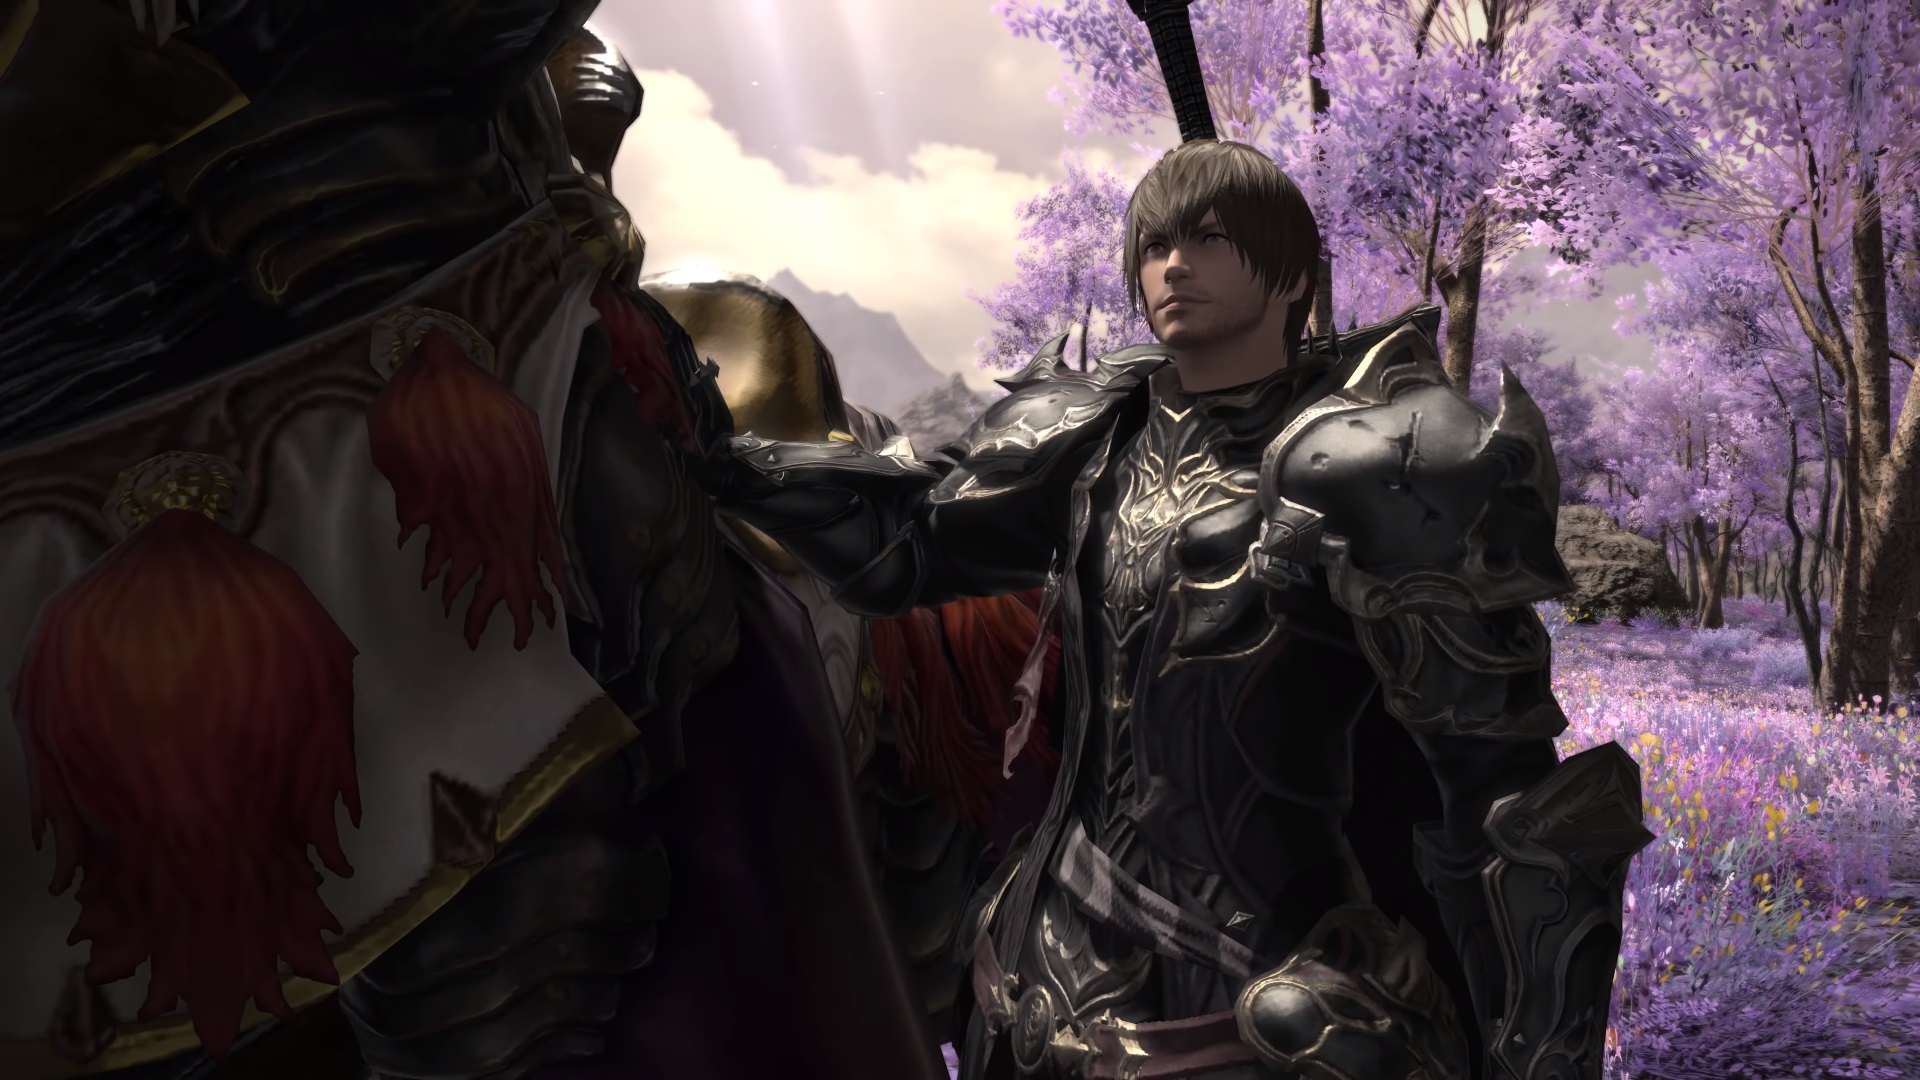 A community for fans of square enix's popular mmorpg final fantasy xiv online, also k...